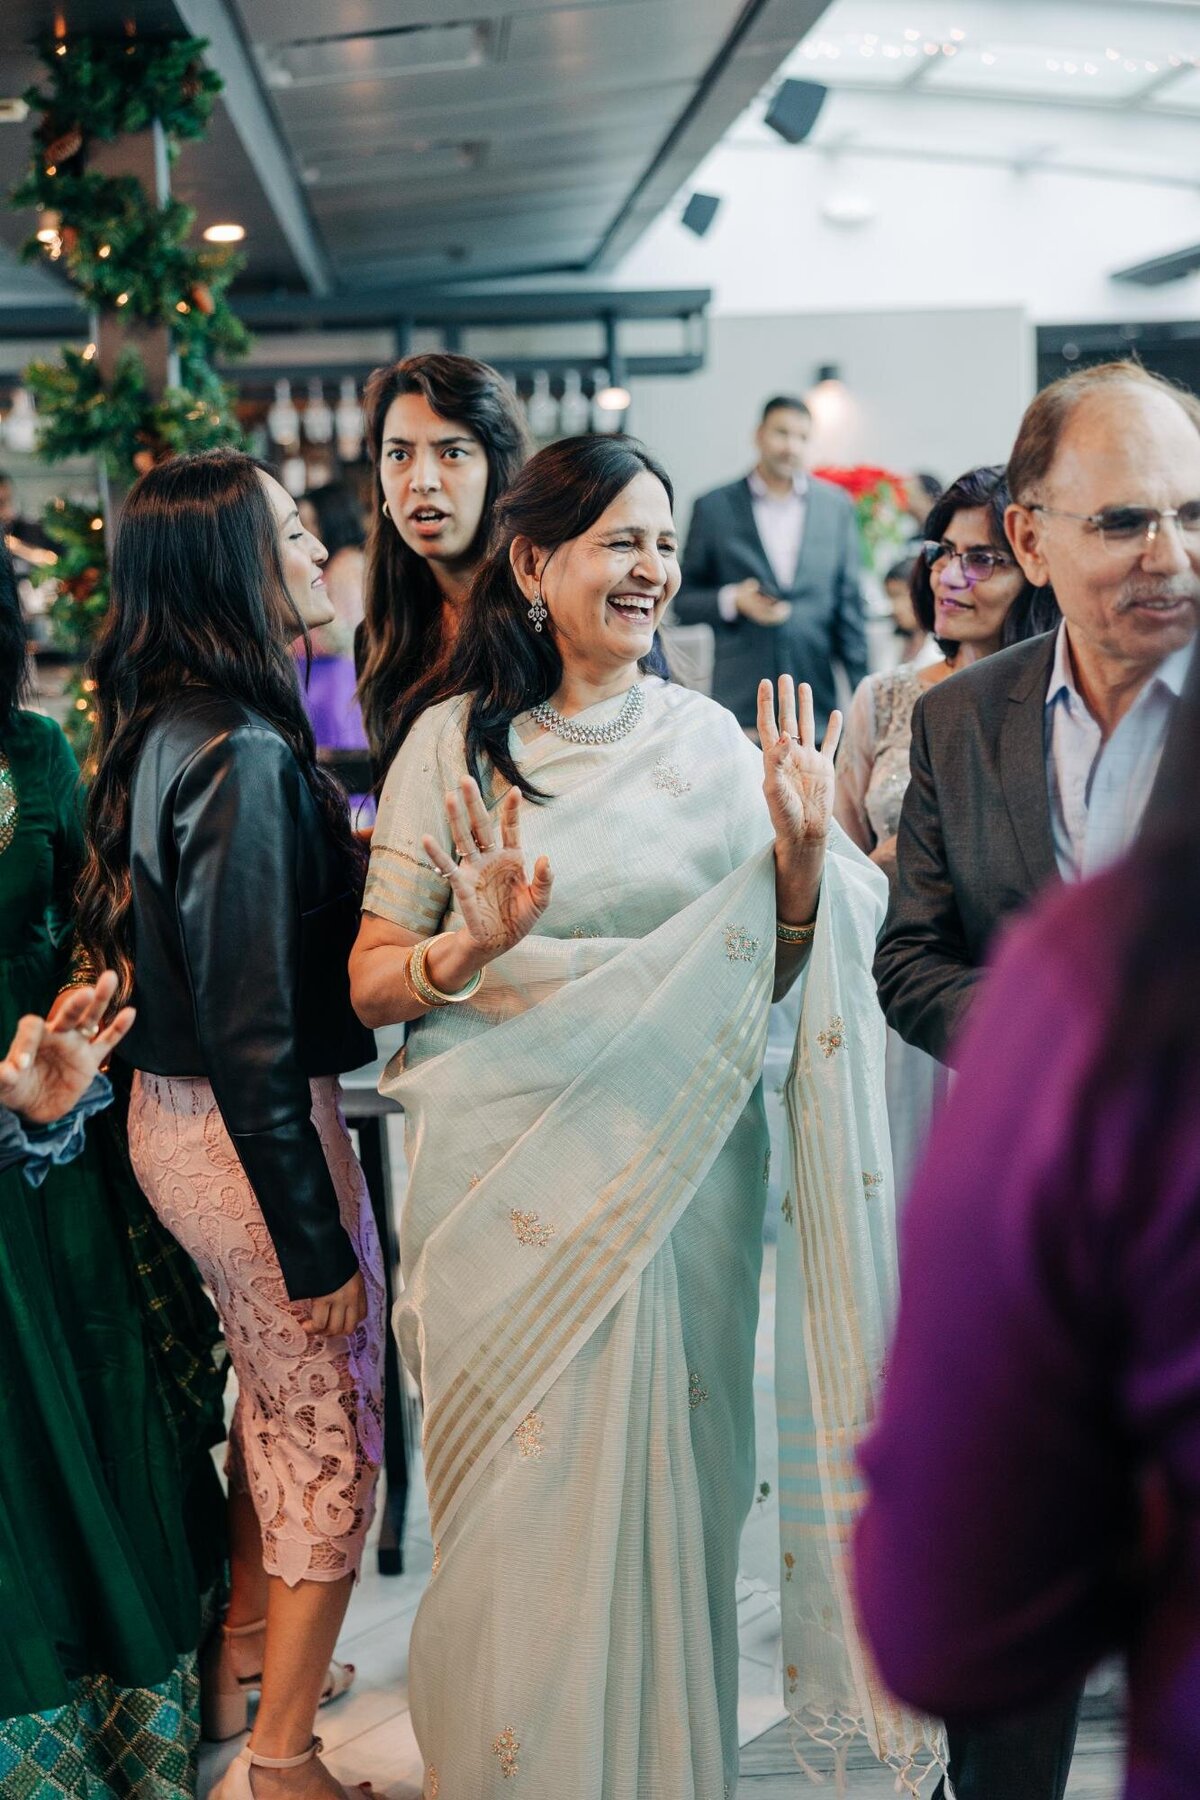 A smiling woman in a sari engaging in conversation at a festive event with other guests in the background.